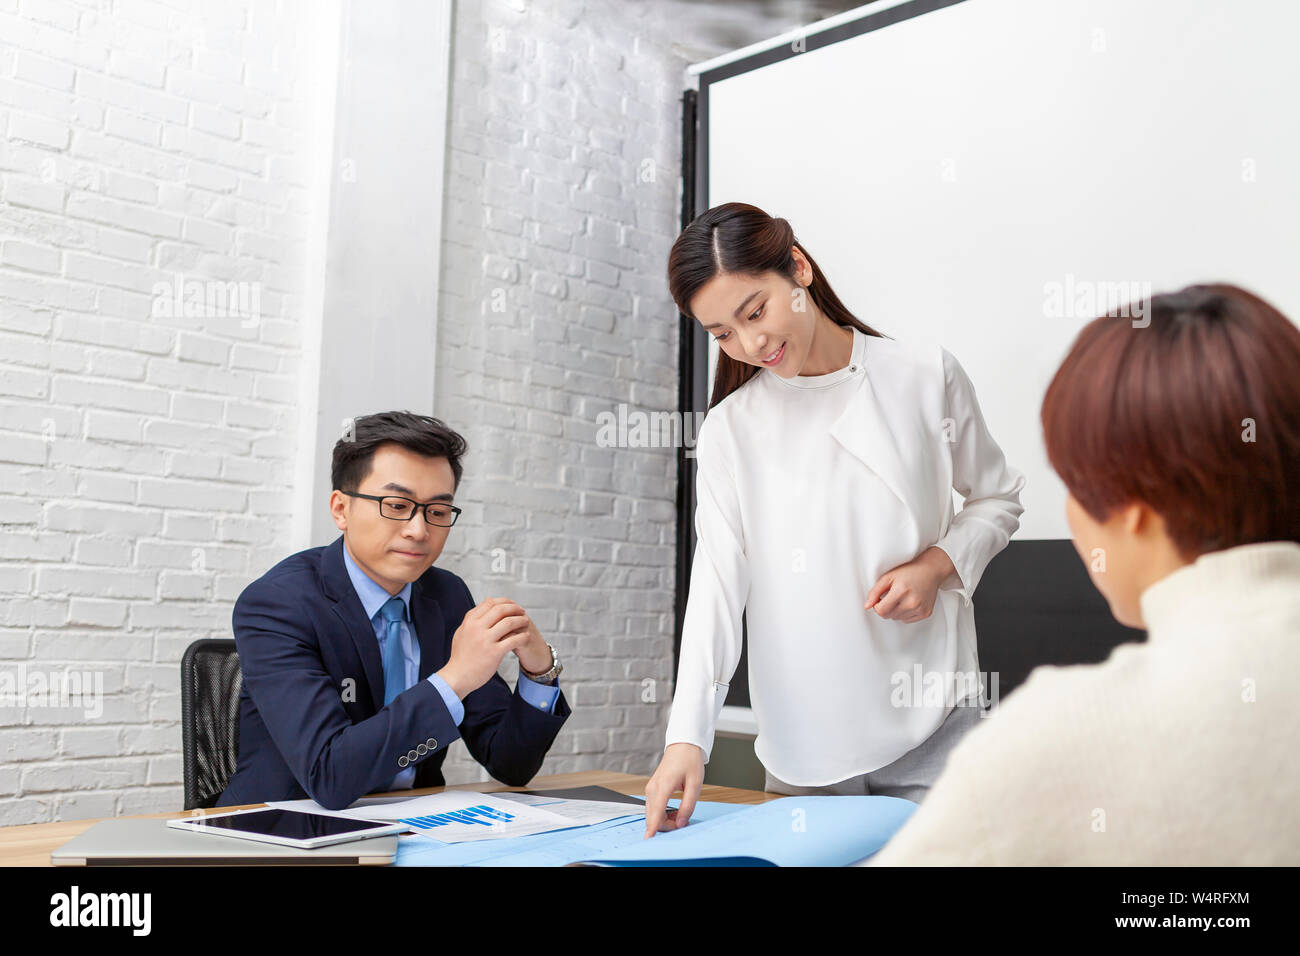 Young architect presenting blueprint in meeting room, Beijing, China Stock Photo